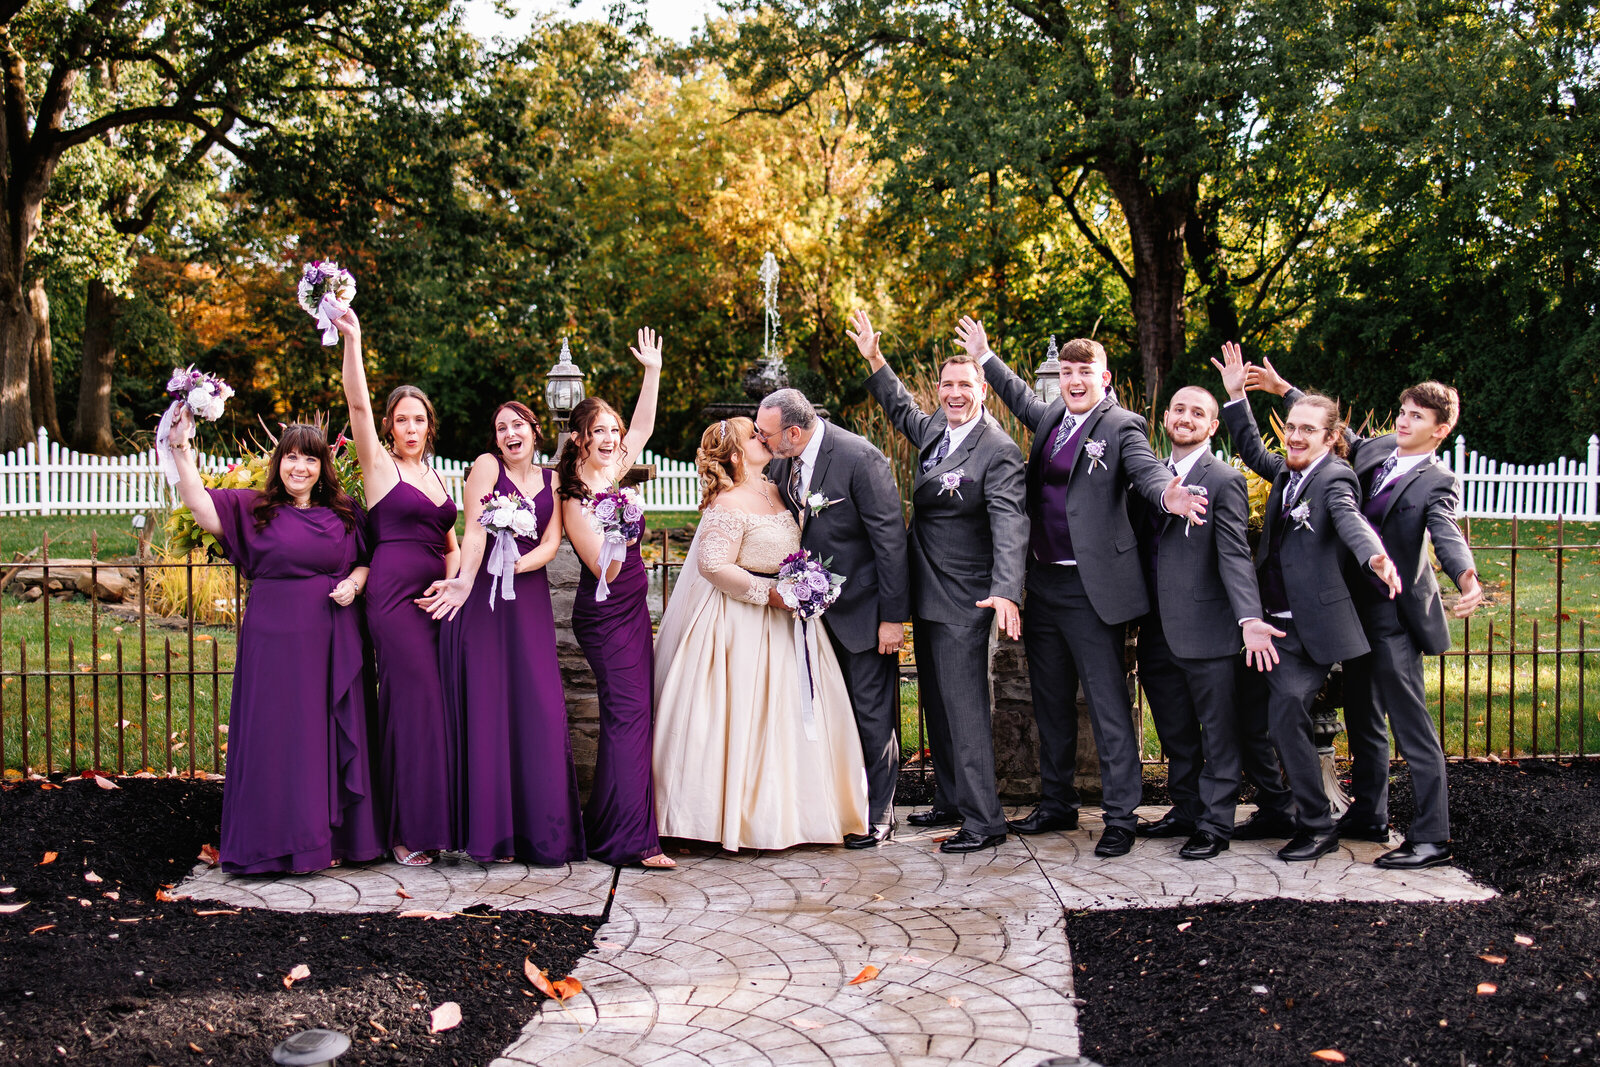 Bridal party cheers enthusiastically as bride and groom share a kiss